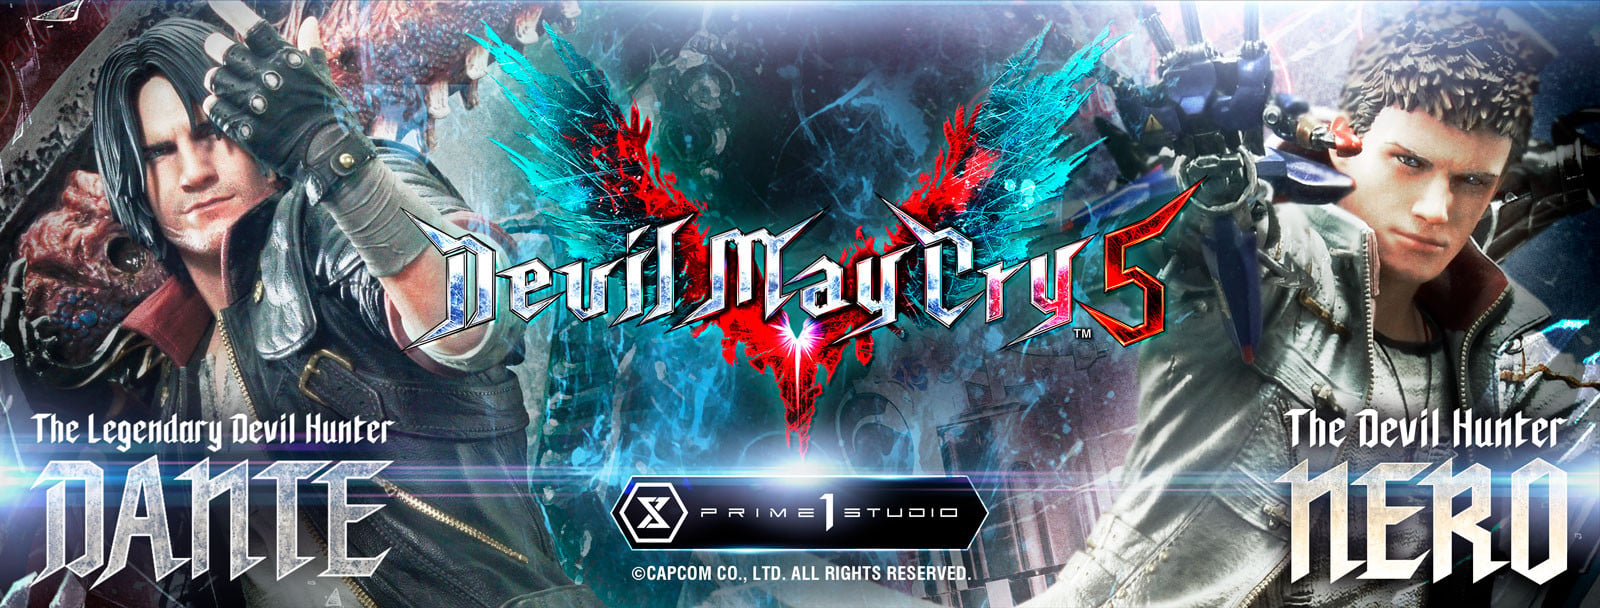 Devil May Cry 5 EX color Special Campaign-main